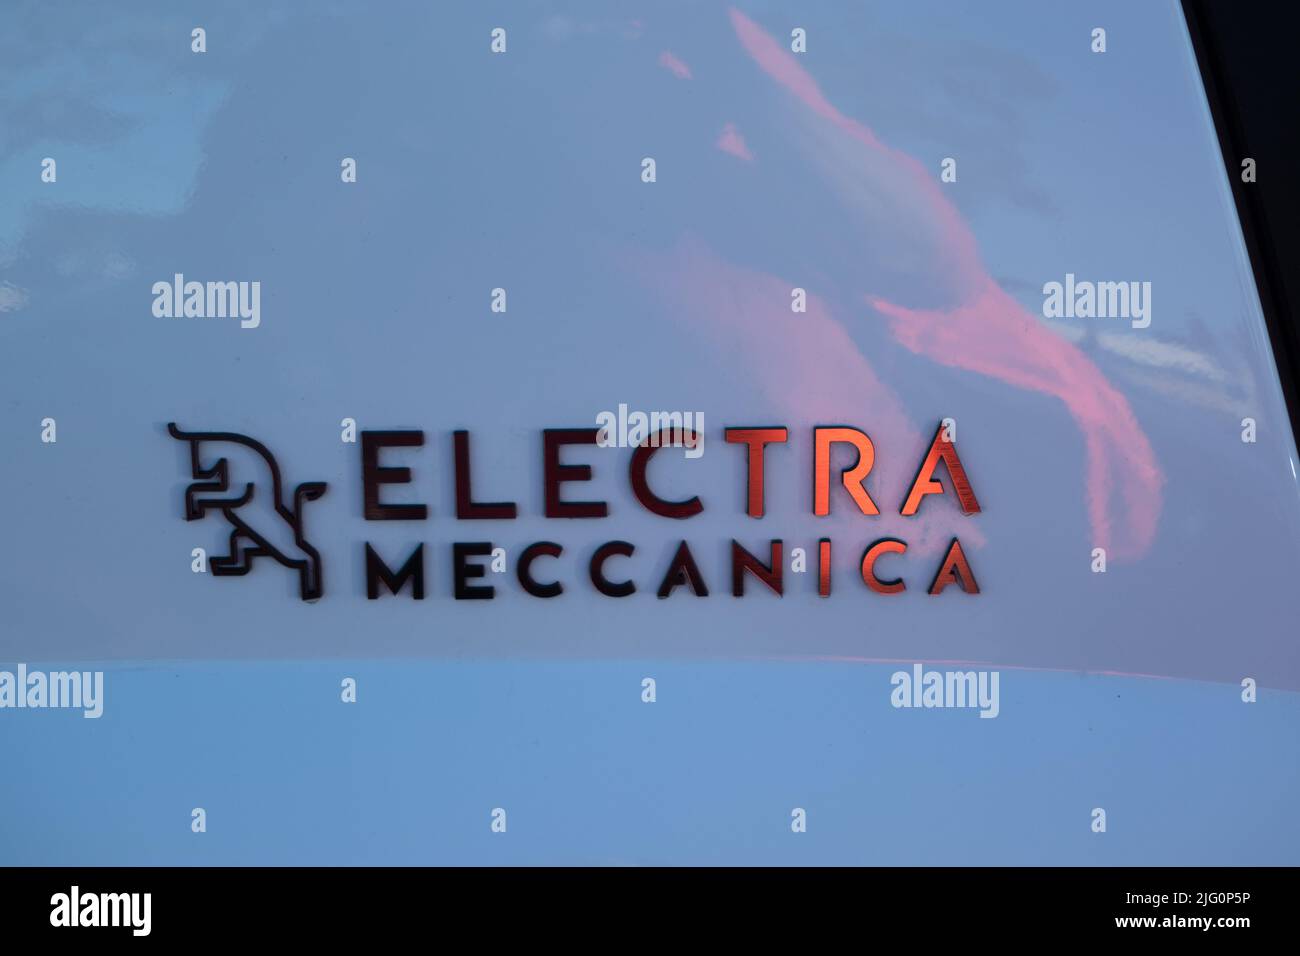 Electra meccanica logo an electric single person car, with three wheels Stock Photo